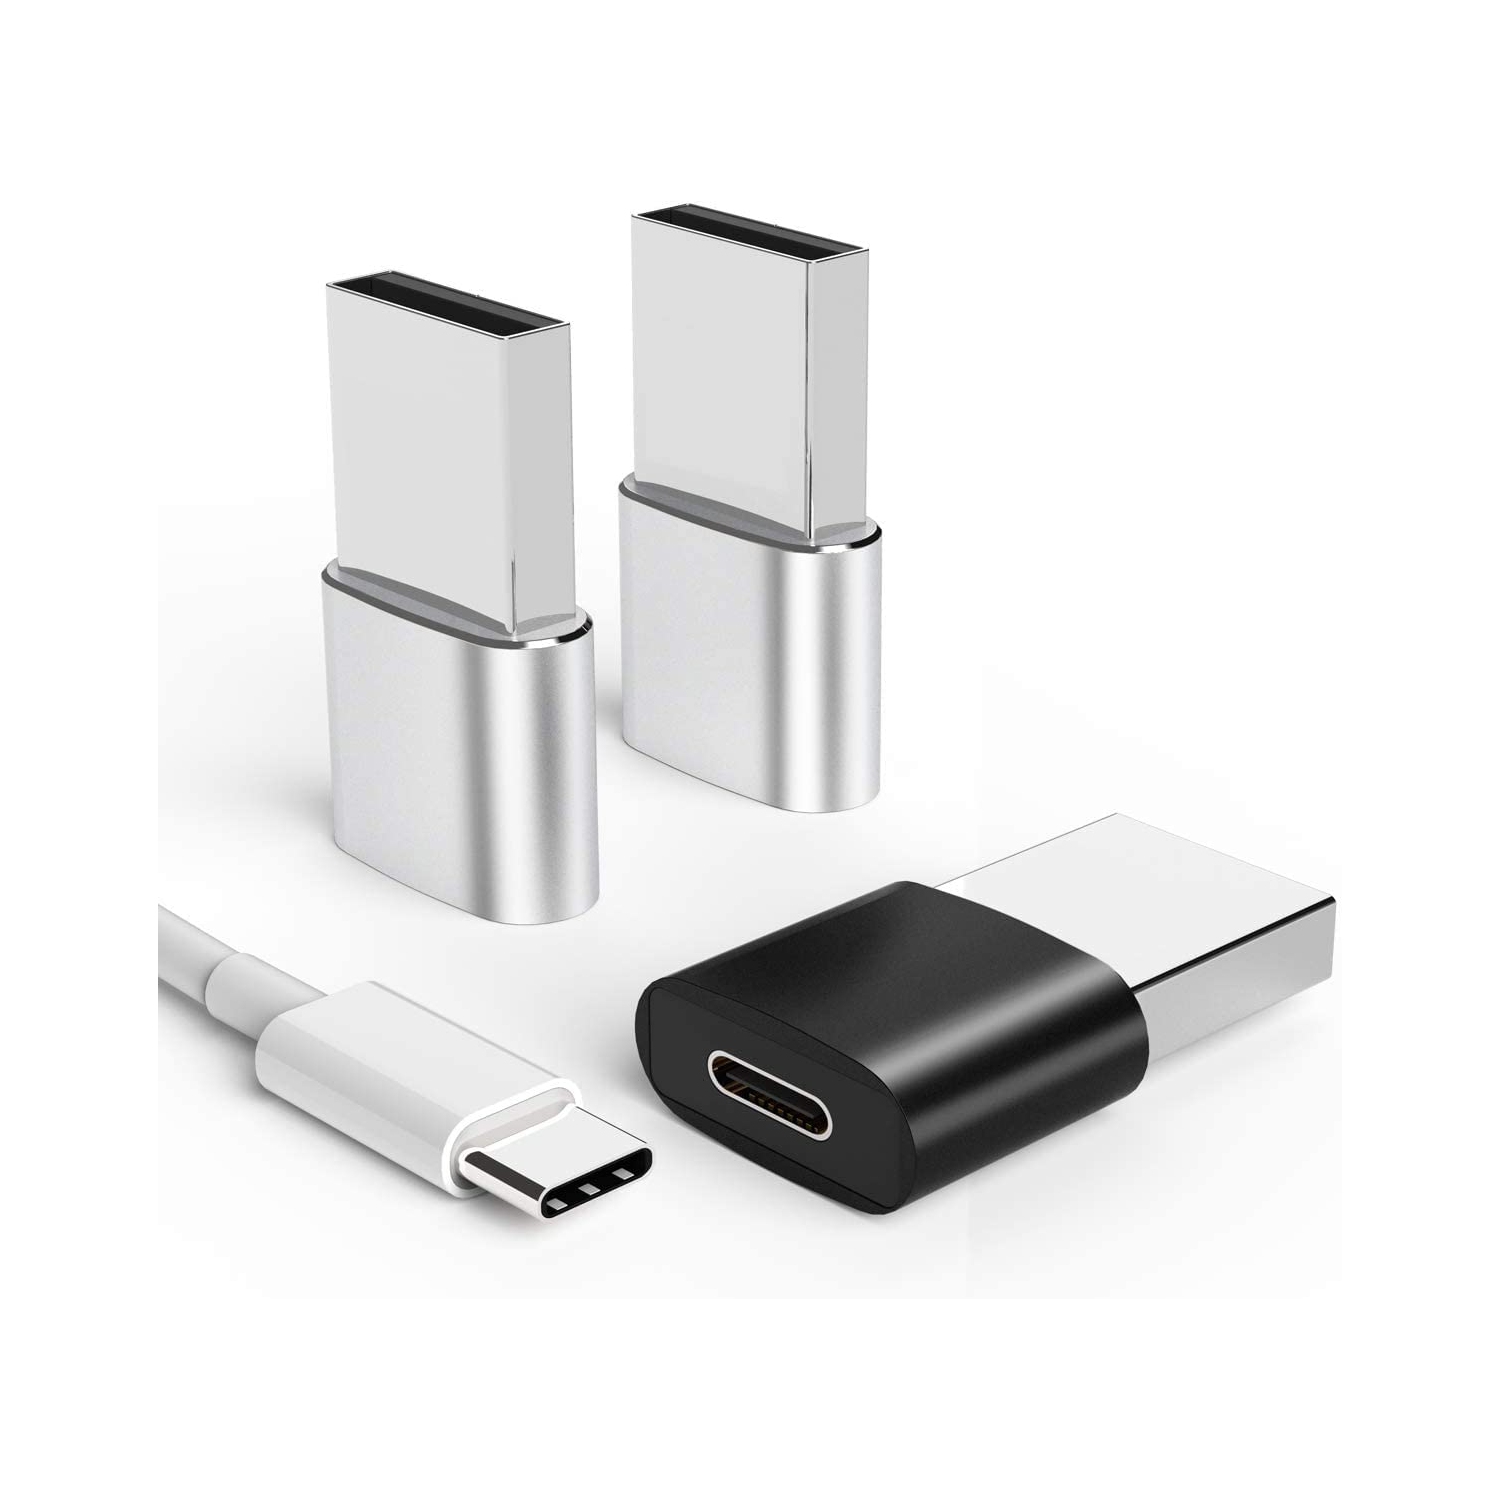 USB C to USB Adapter Type-c Female to A Male Power Charger Connector(3pack)Thunderbolt Charging Block Portable for Apple Iphone 11 12 13 Pro Max Ipad Samsung Galaxy S20 S21 S22 Not